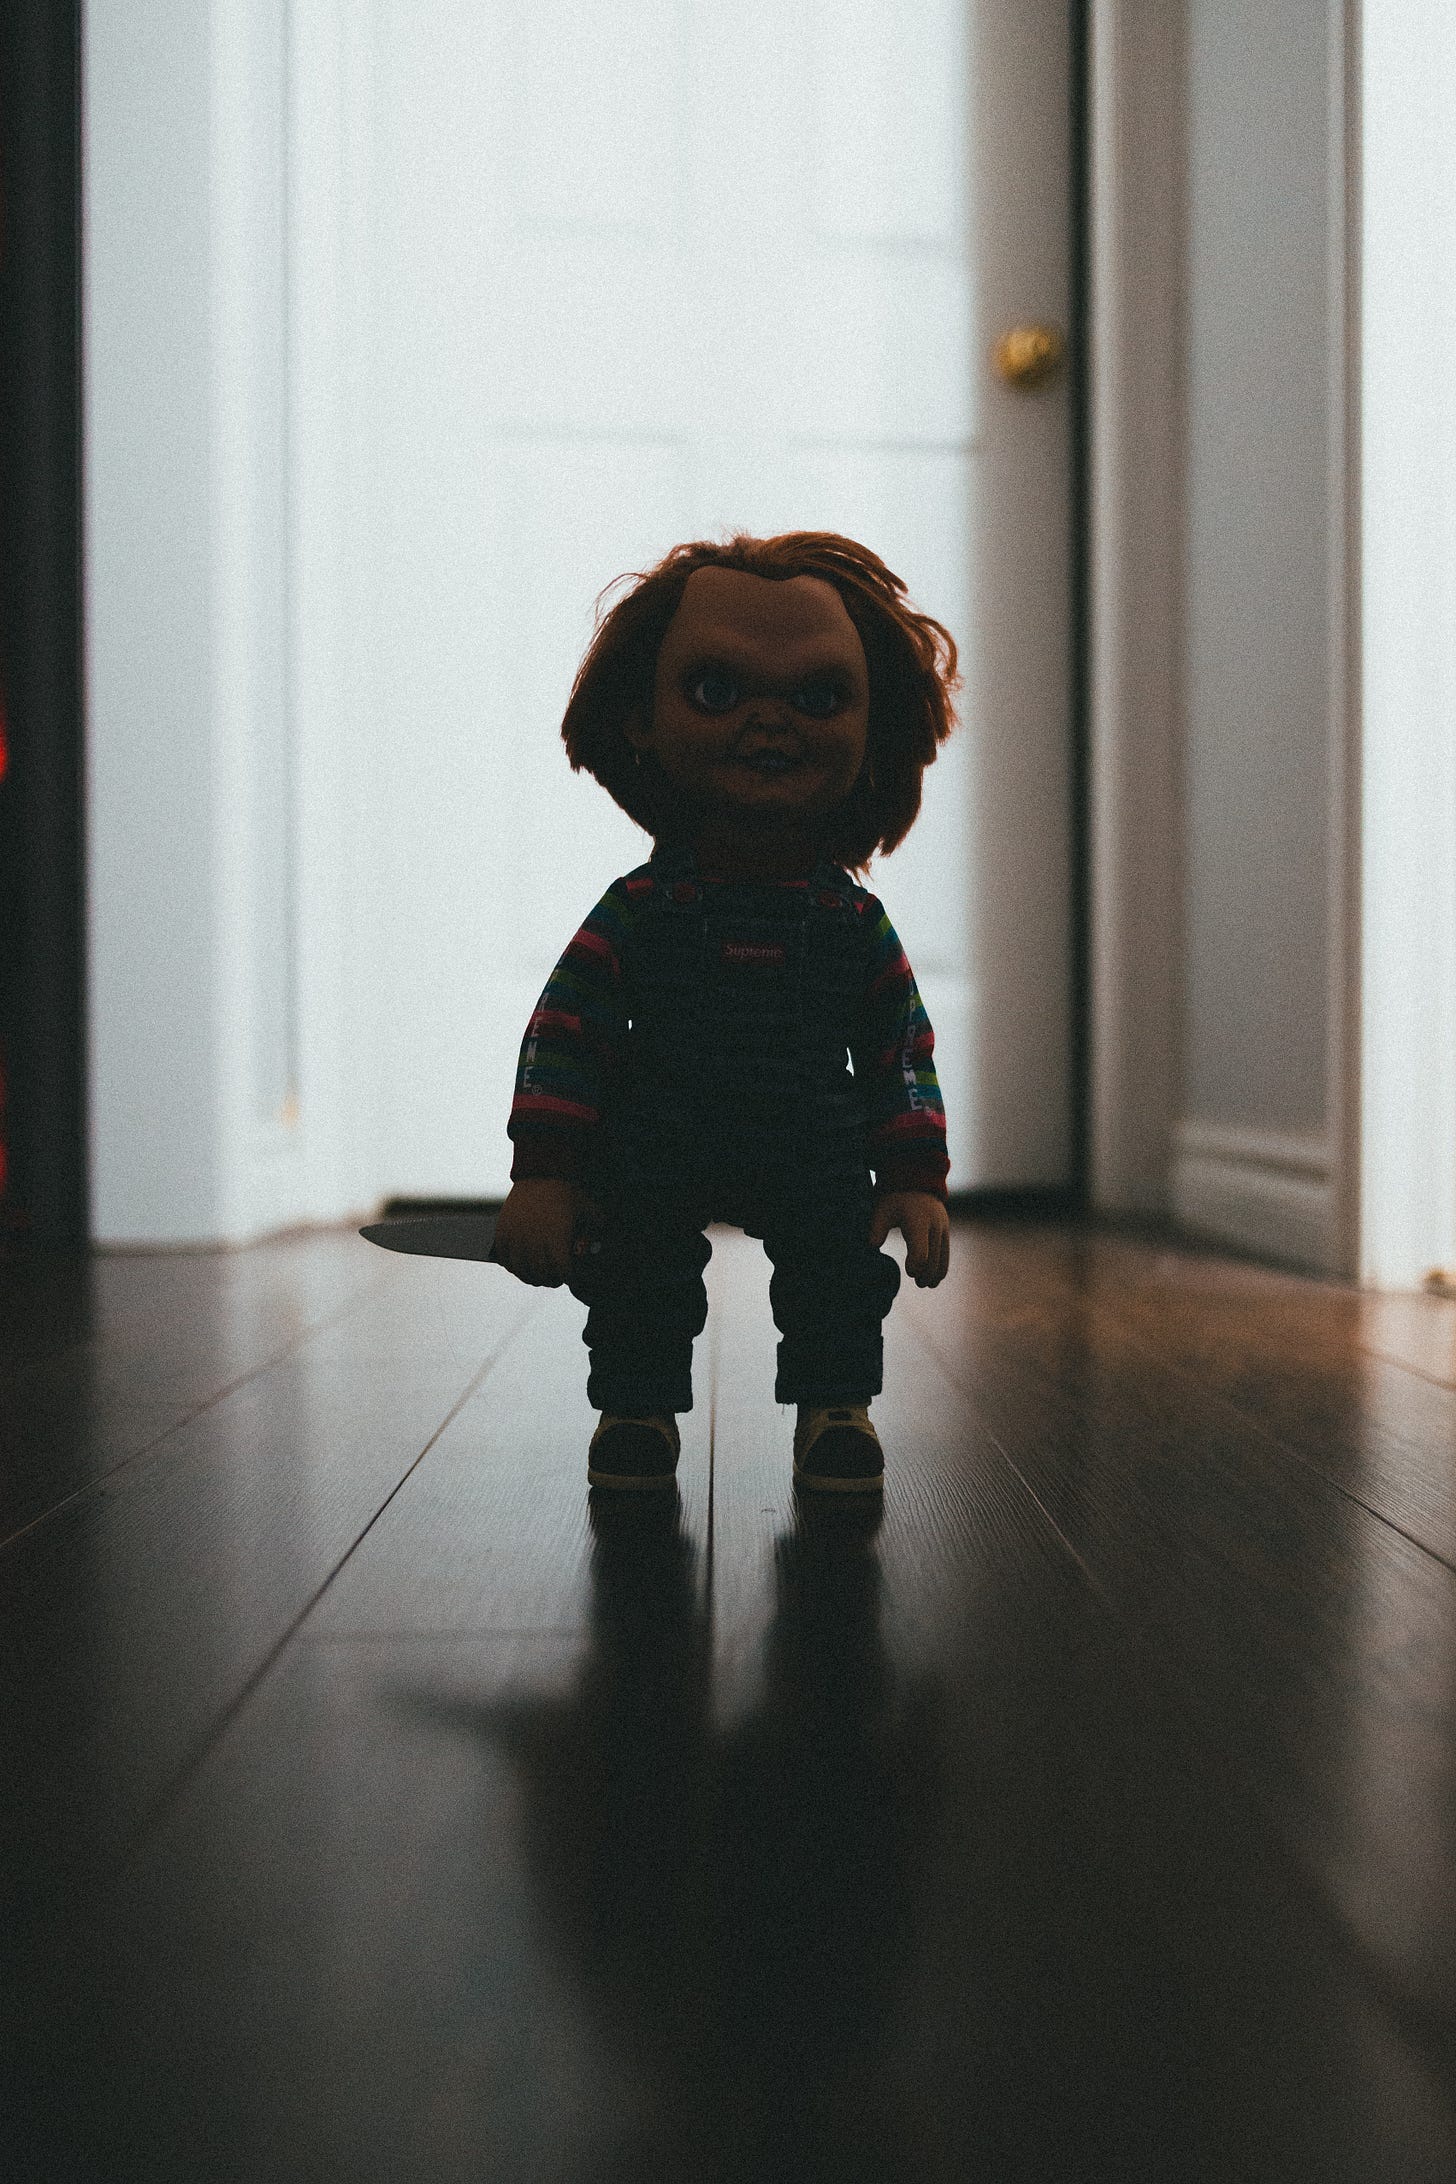 A photograph of Chucky the killer doll standing in a hallways wielding a knife.